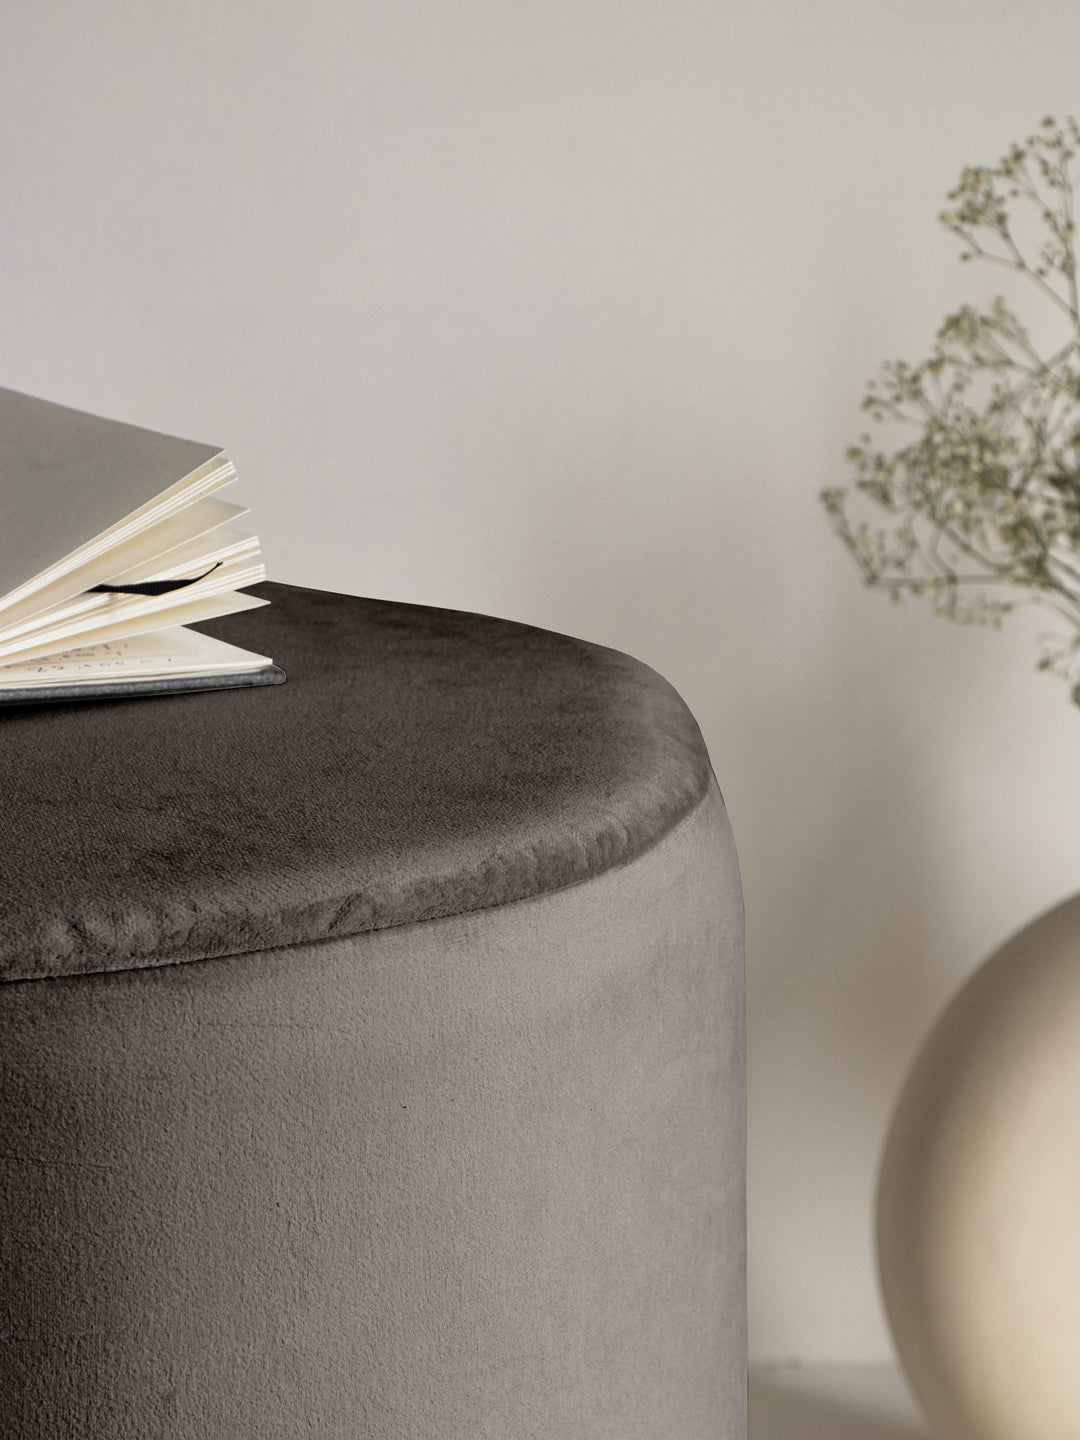 Fossil Grey Stool With Gold Rings